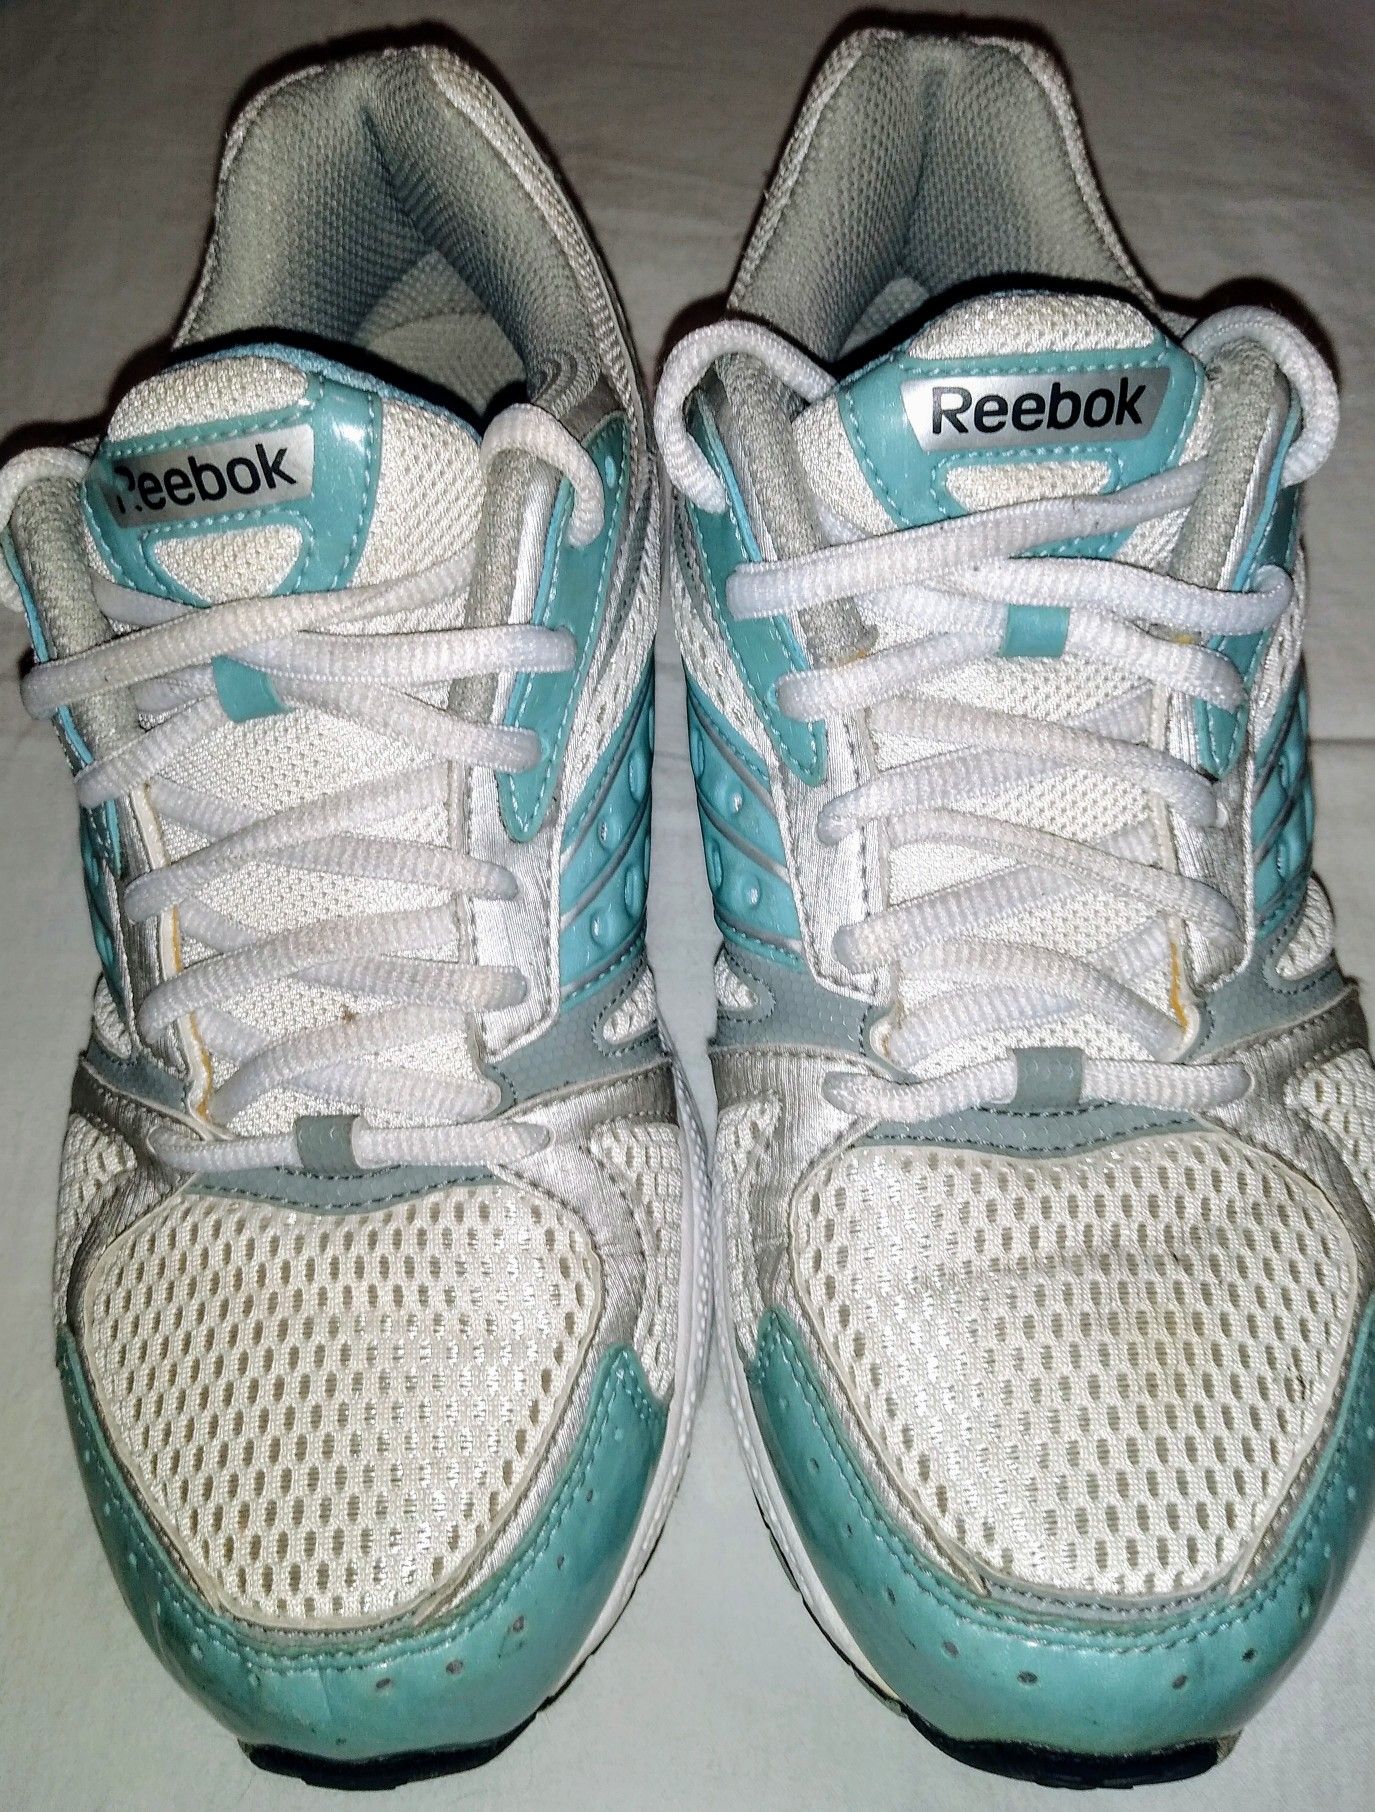 Ladies Reebok's size 7.5 baby blue, white and gray